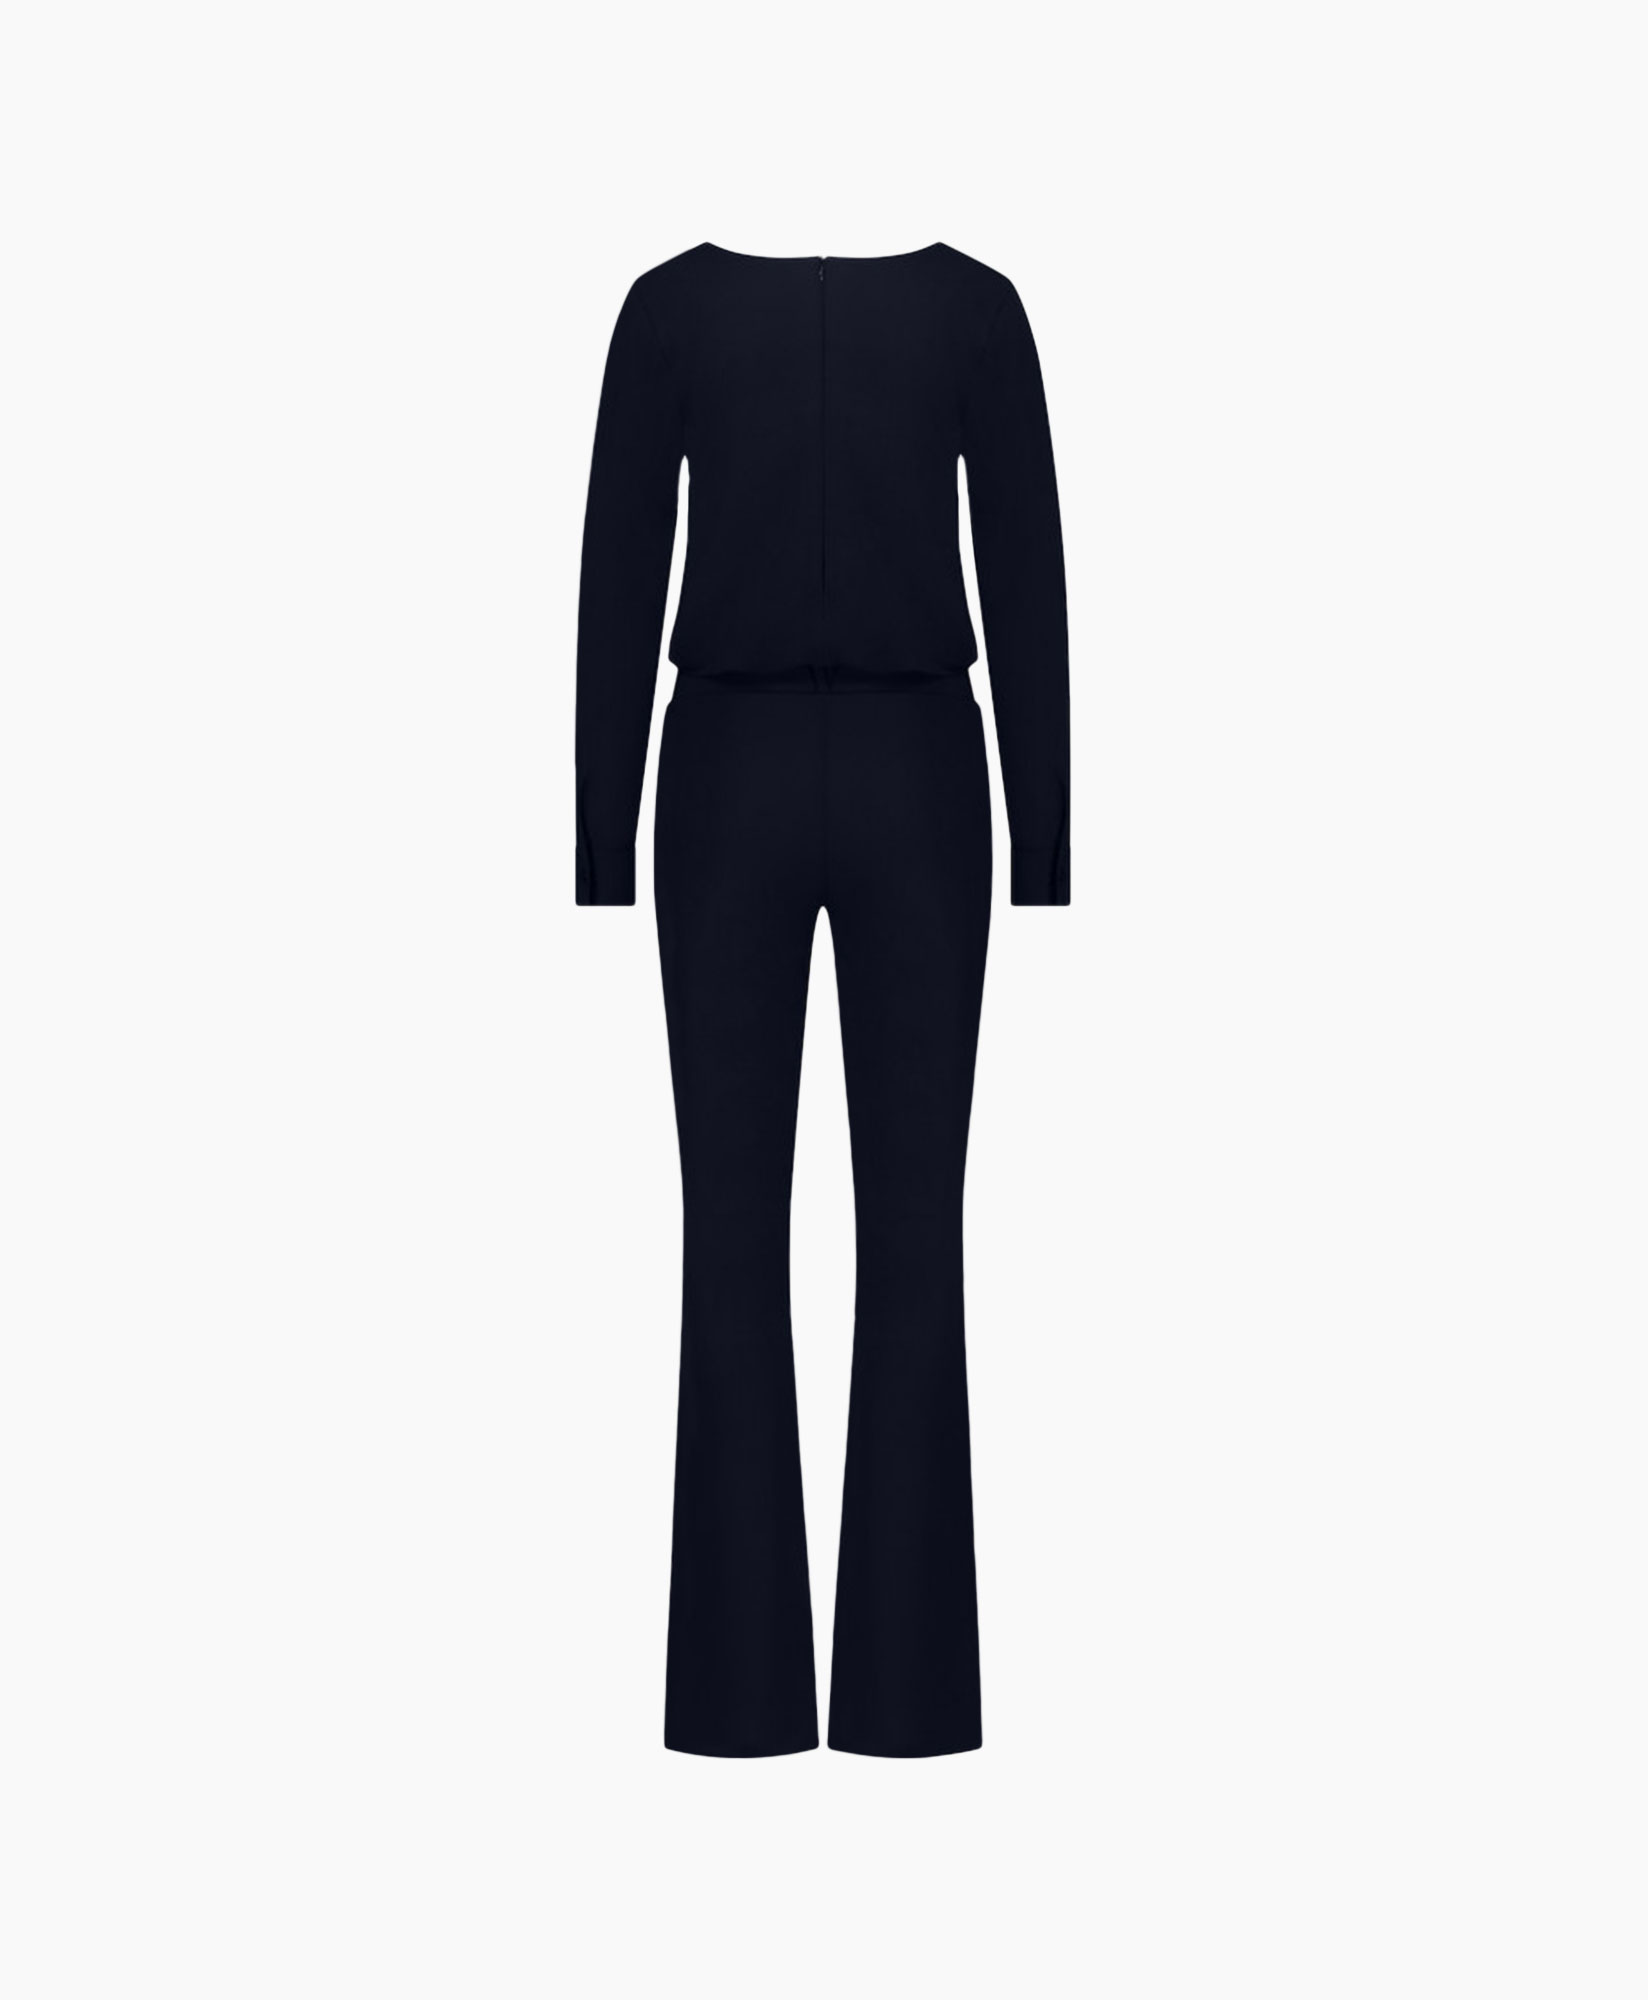 Jumpsuit Kimmy Flair Donker Blauw